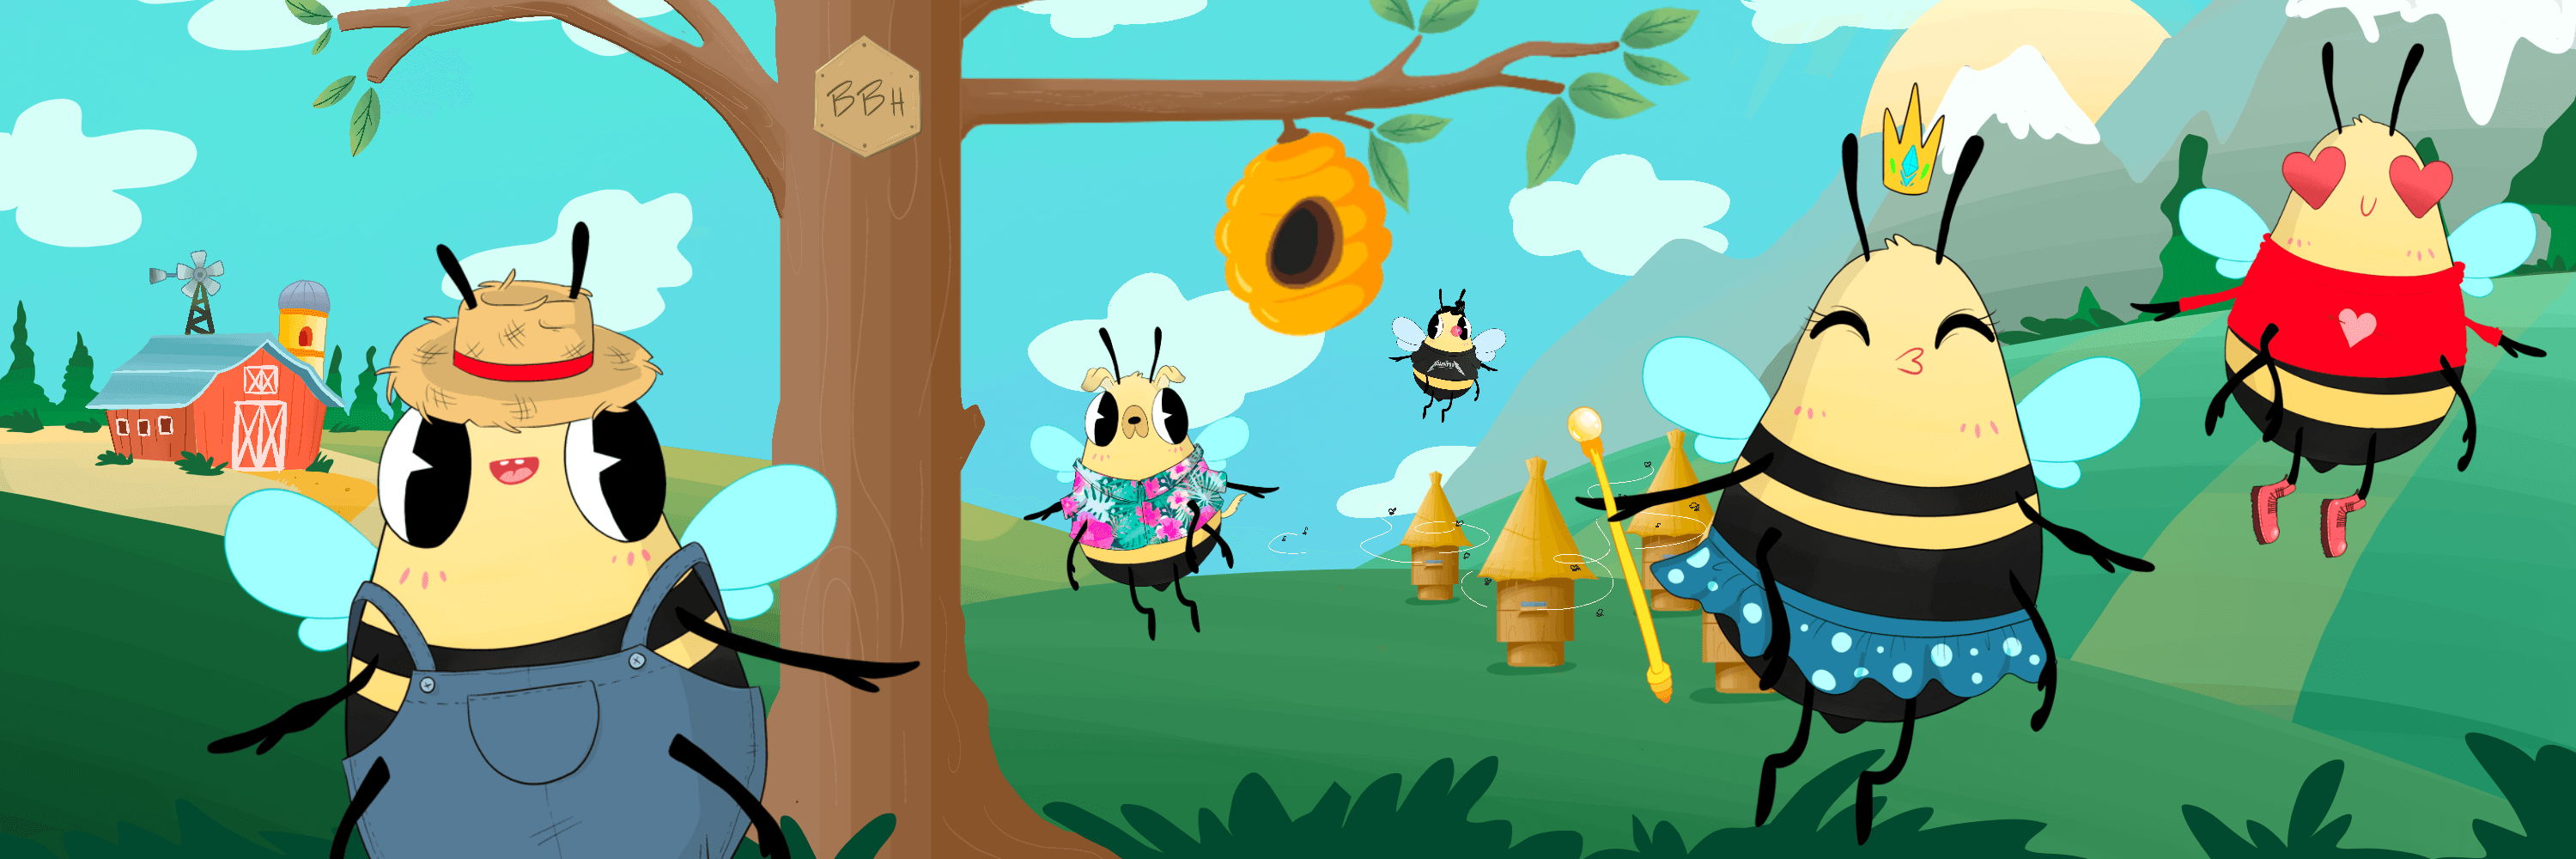 Buzzy Bees Hive